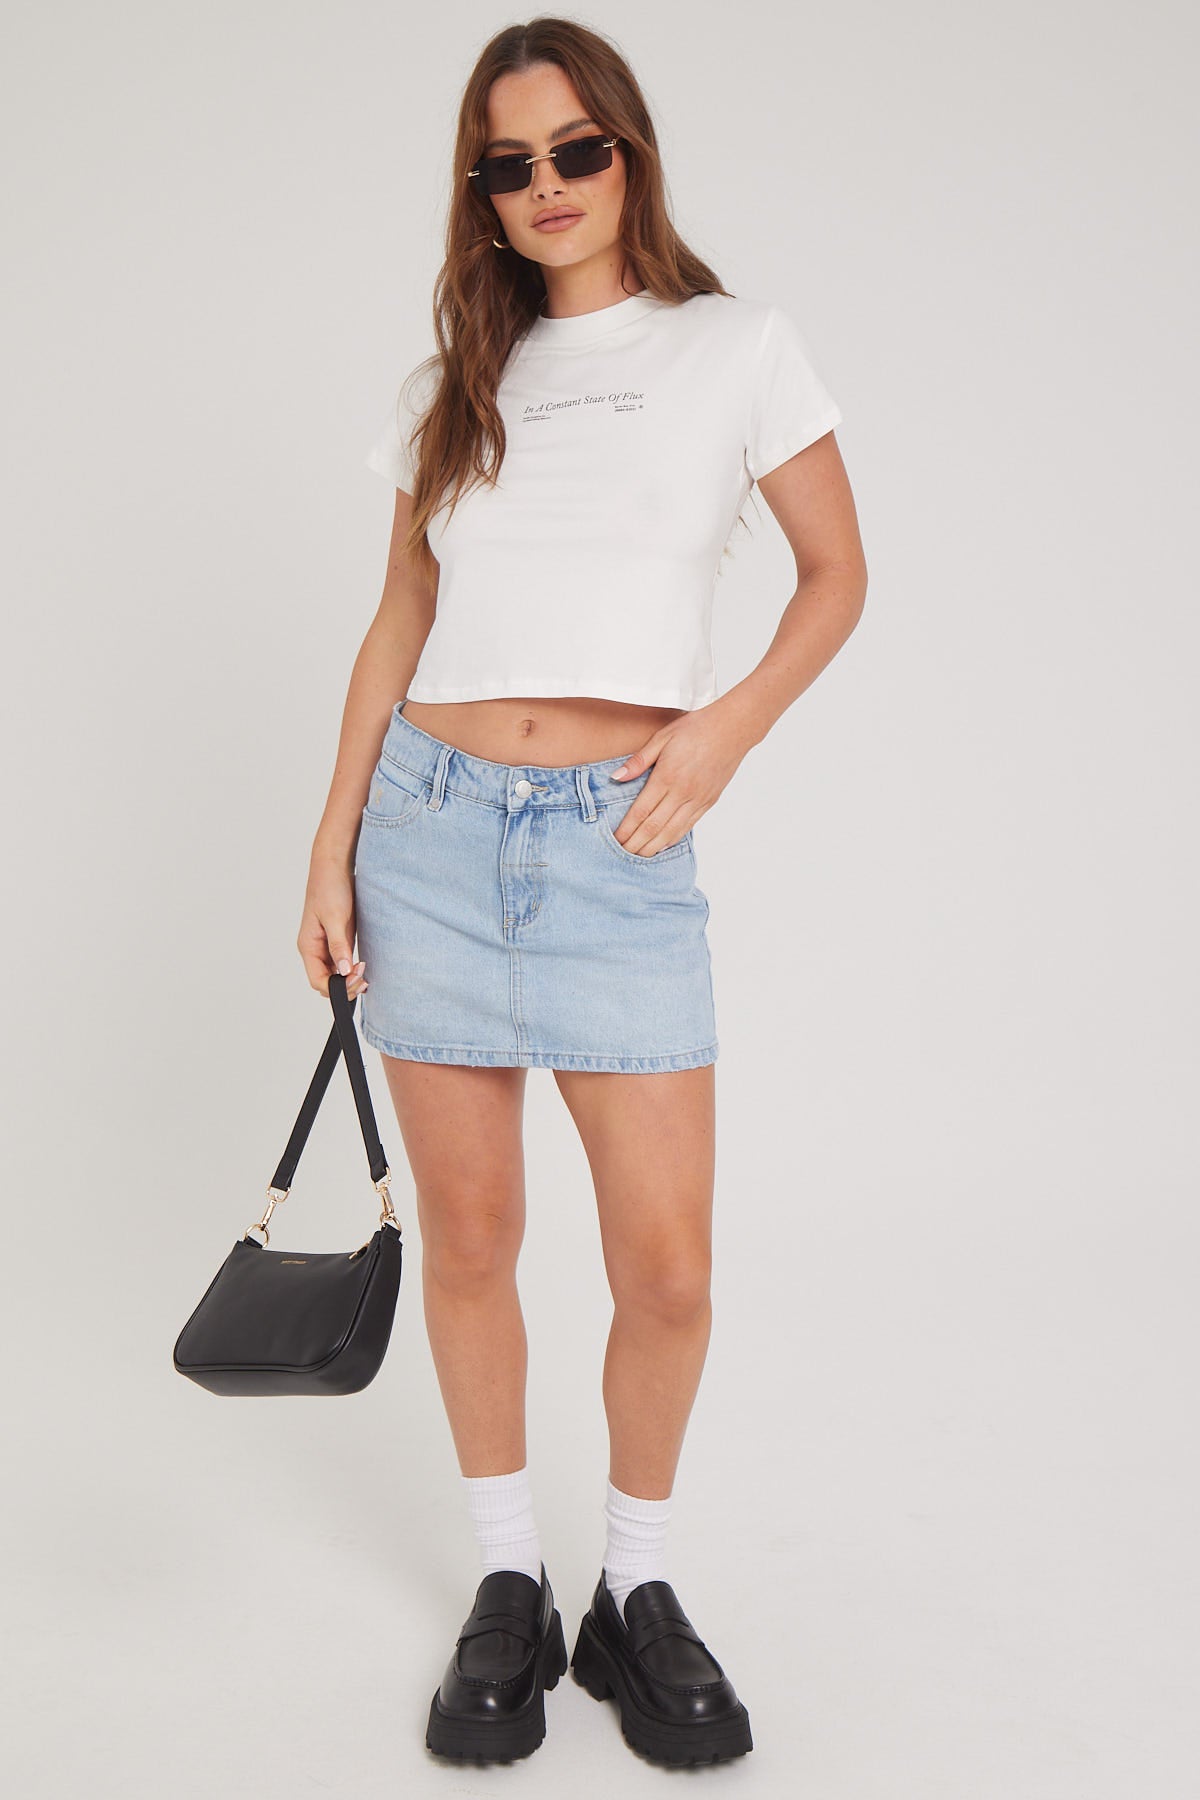 Thrills Constant State of Flux Mini Tee White